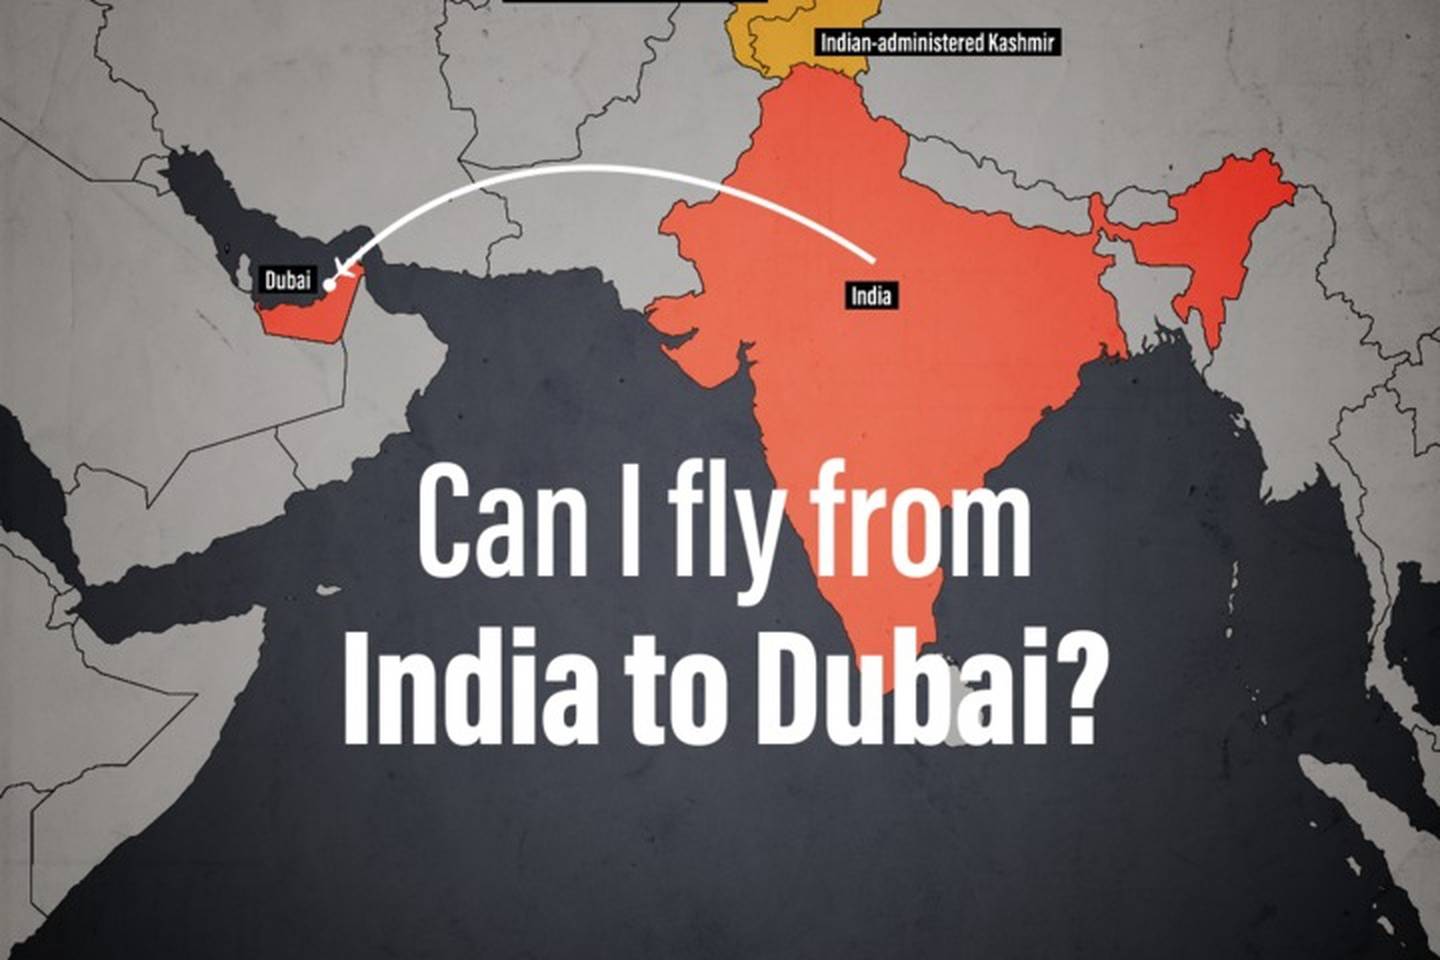 Can I fly from India to Dubai and what are the travel requirements?